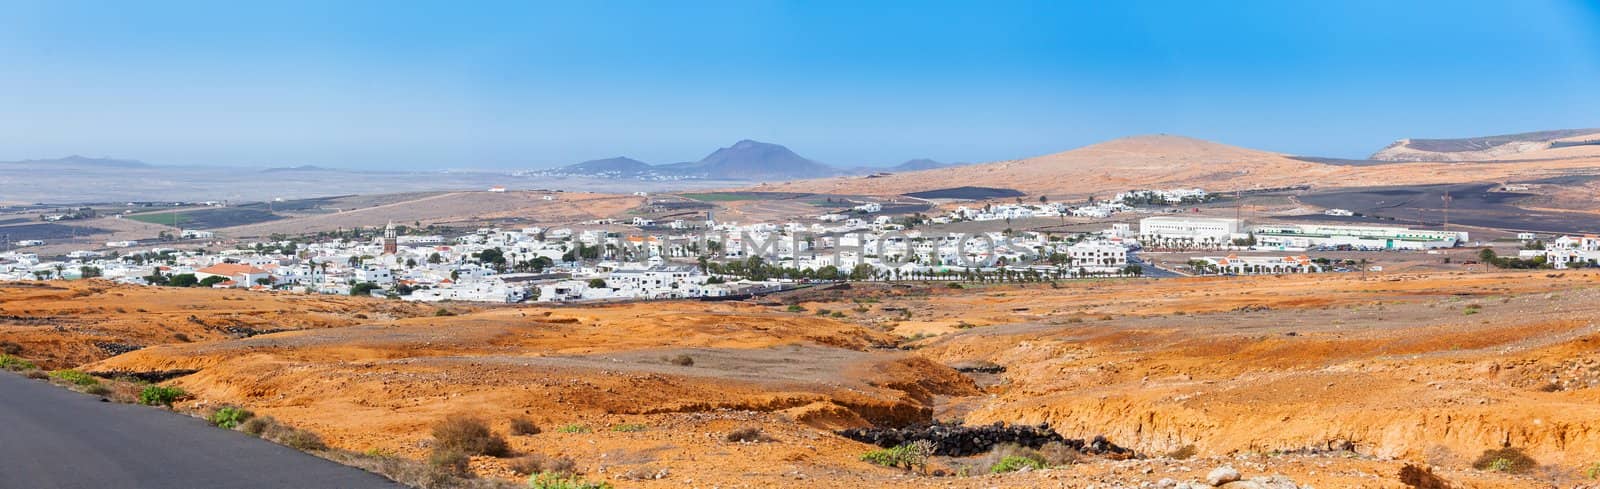 Panorama of a typical cottage town, built on the lava of the volcano. Lanzarote, Canary Islands